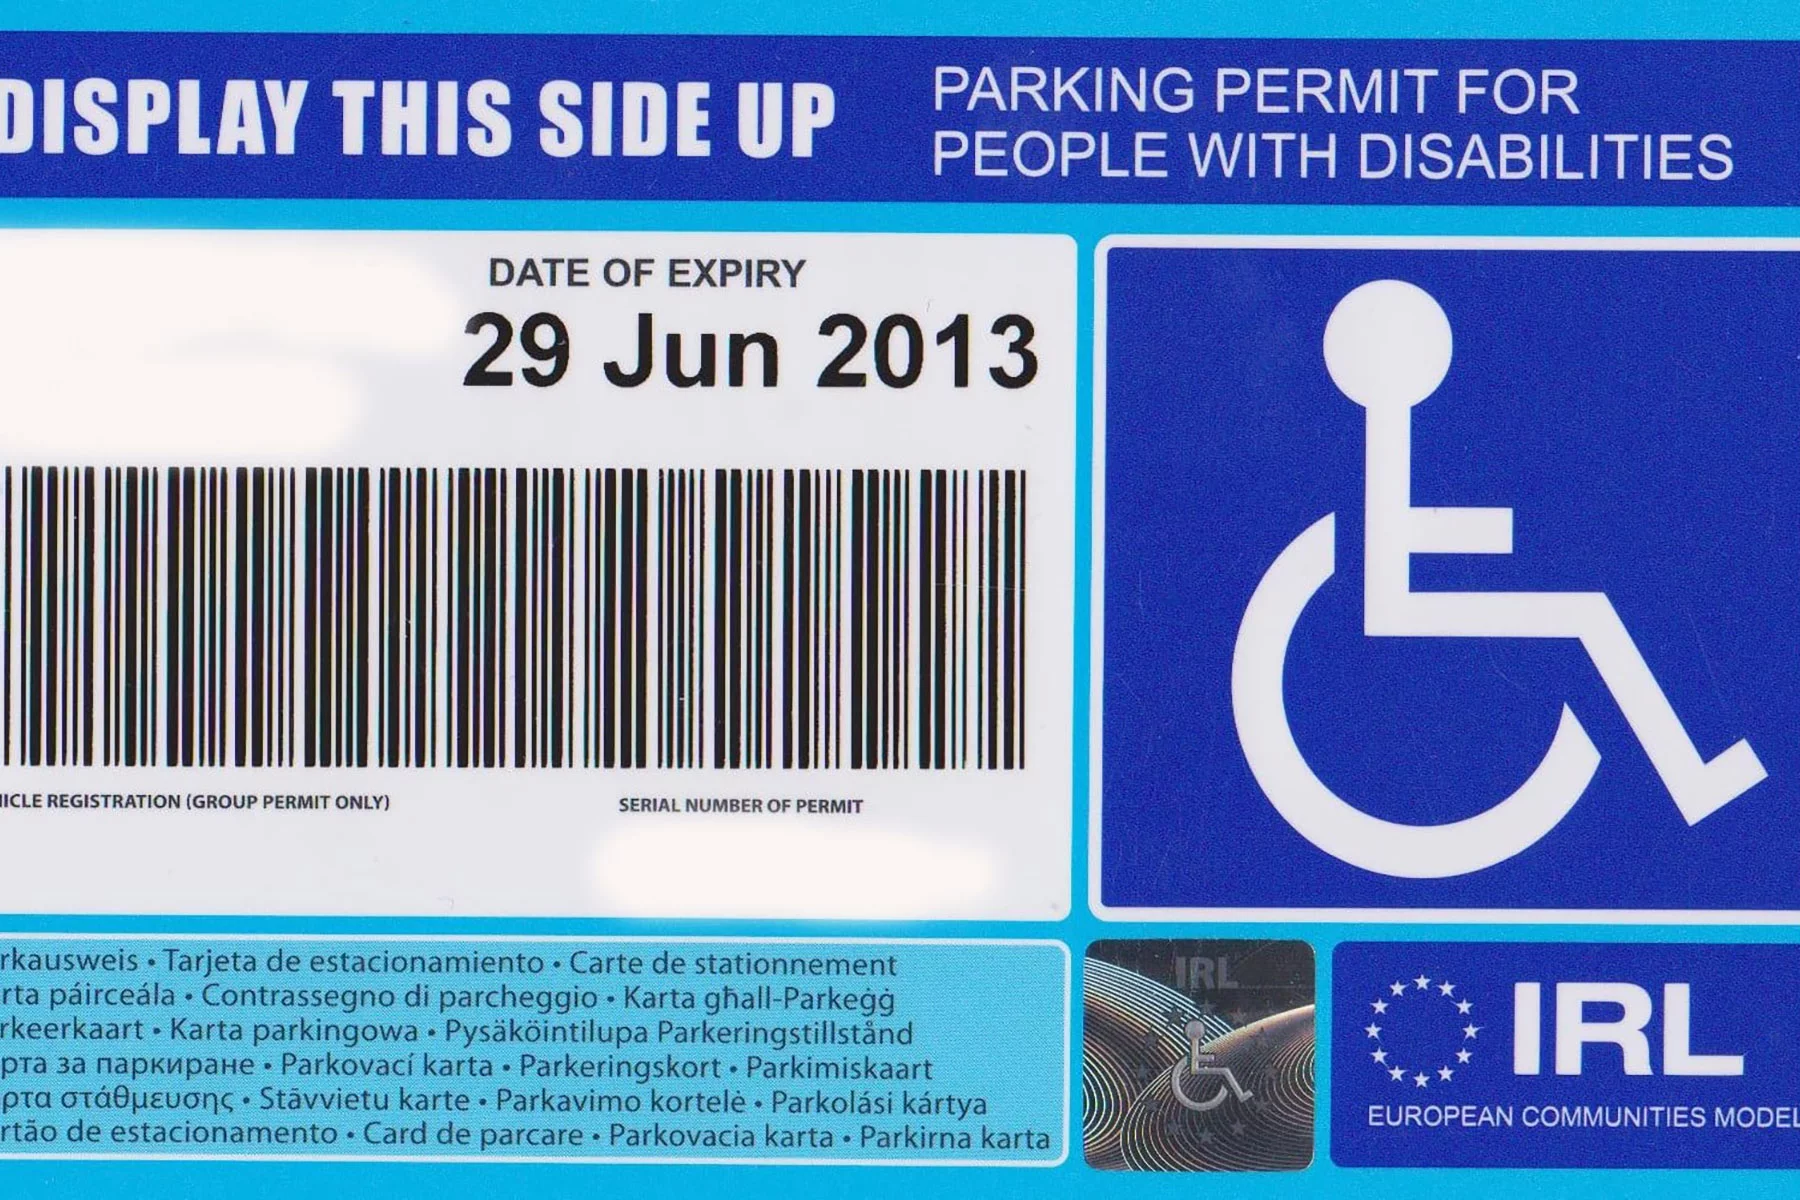 EU parking card for people with disabilities